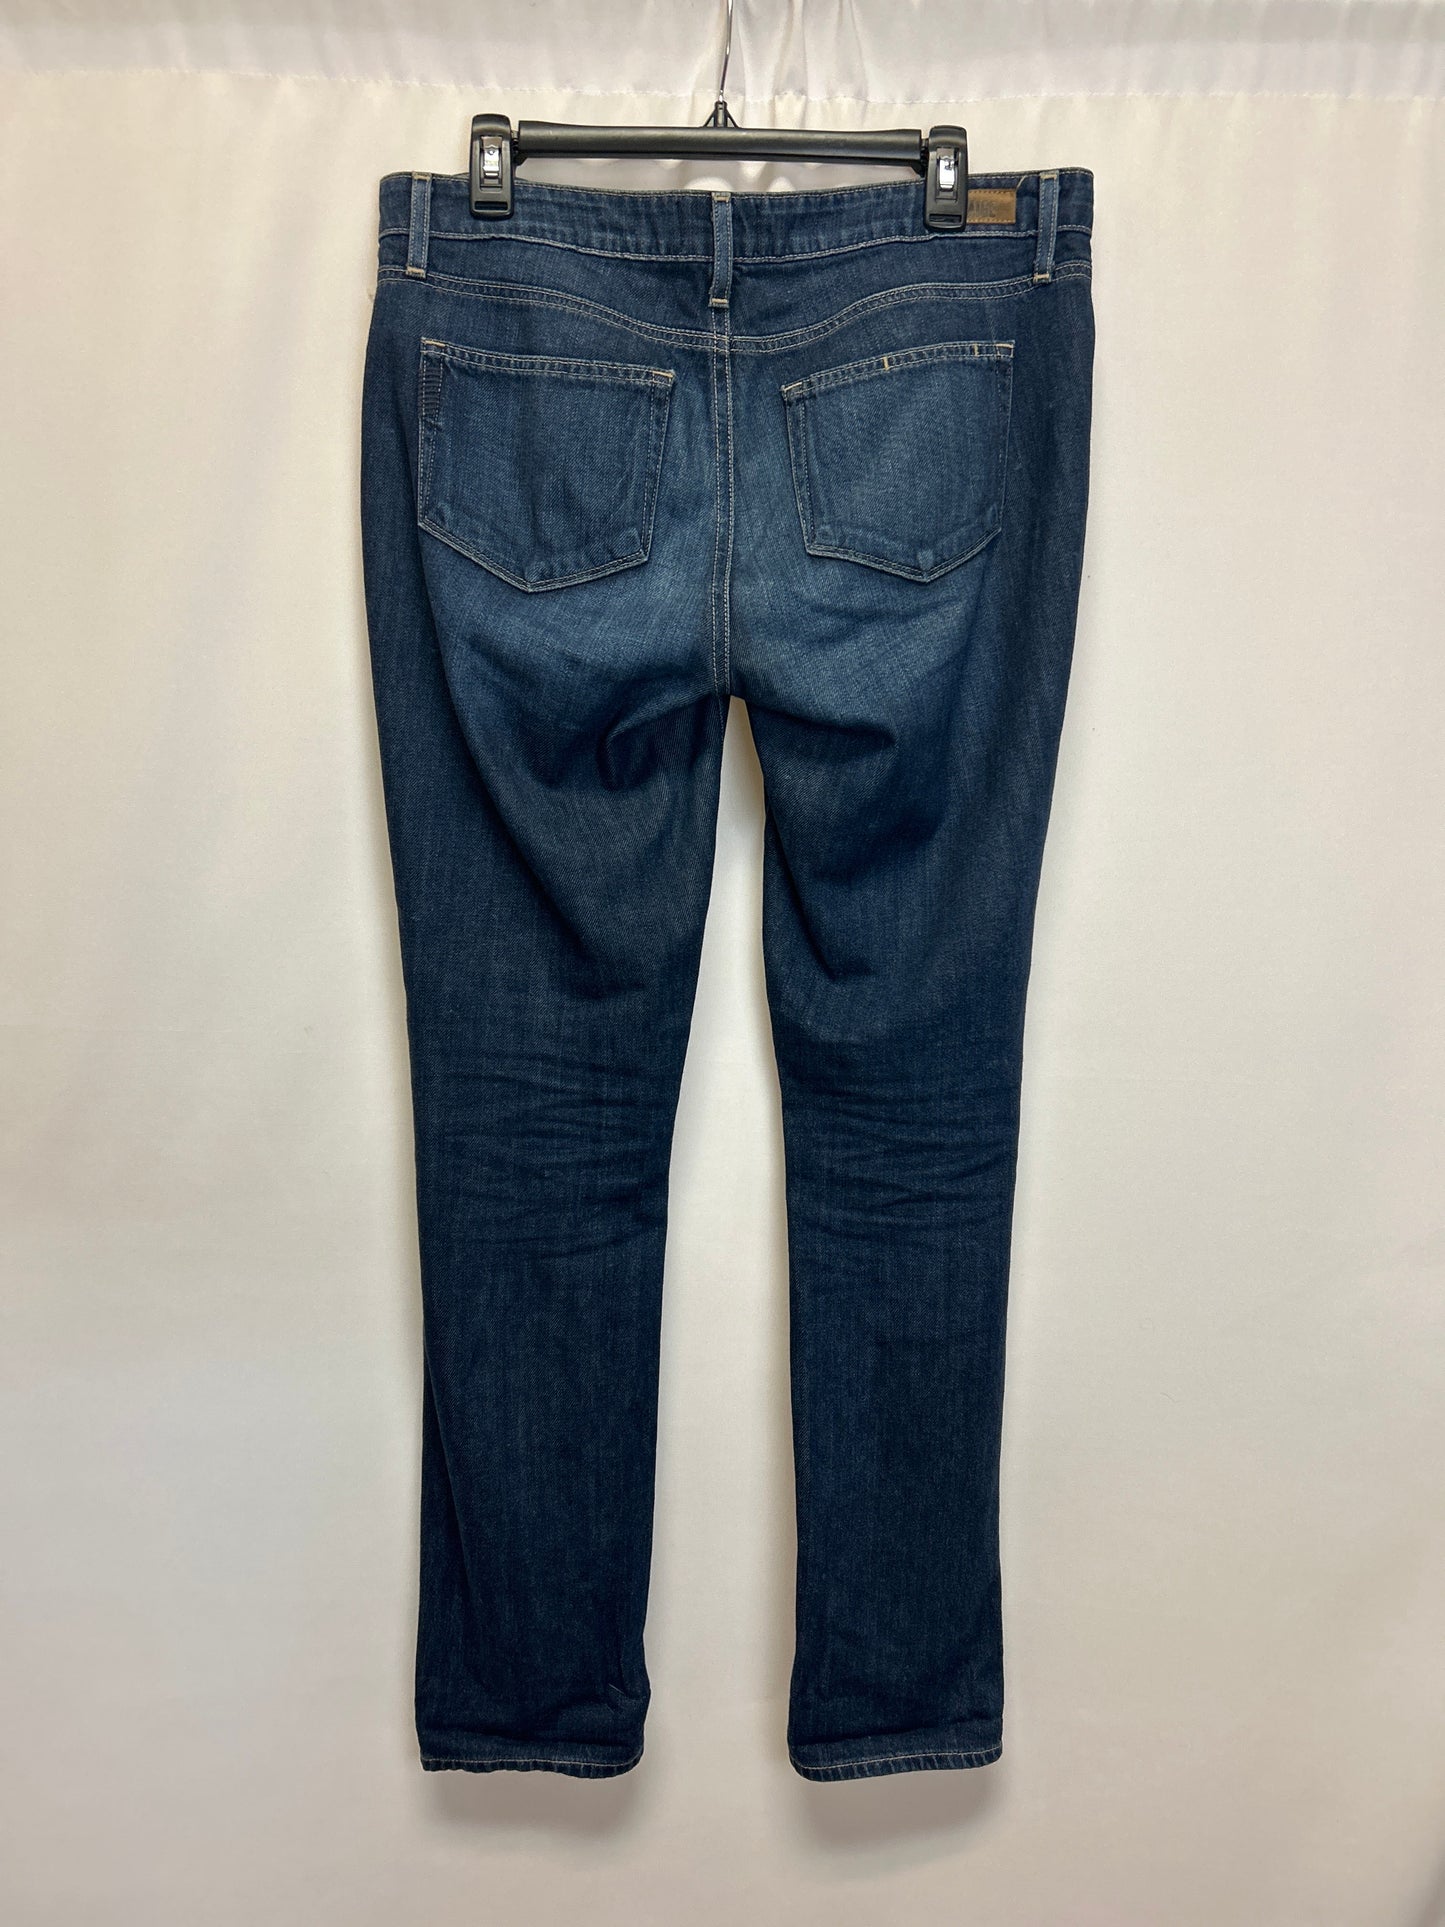 Jeans Skinny By Paige  Size: 8